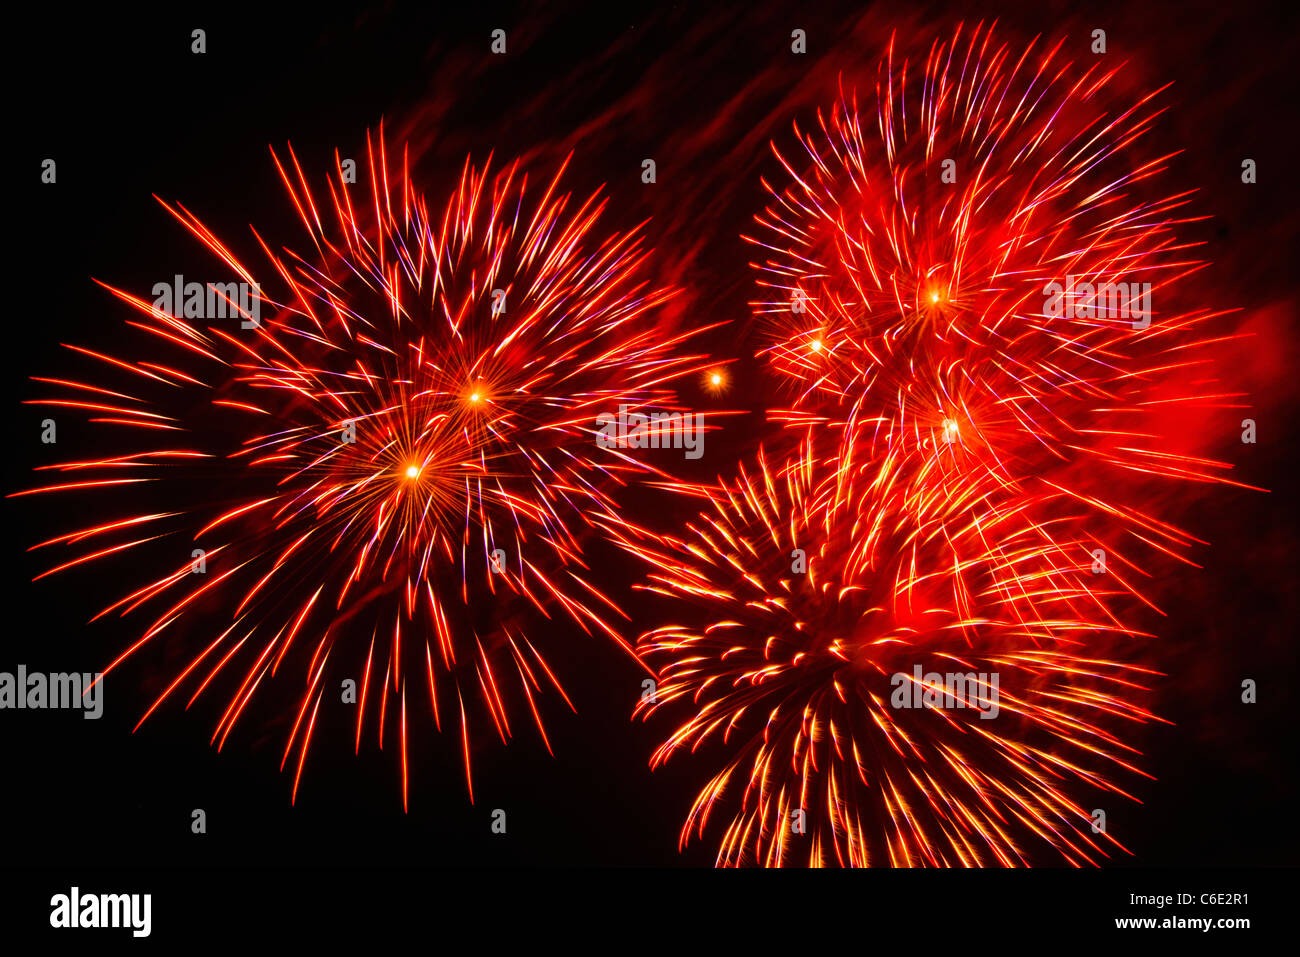 USA, Connecticut, Fireworks explosion against night sky Stock Photo